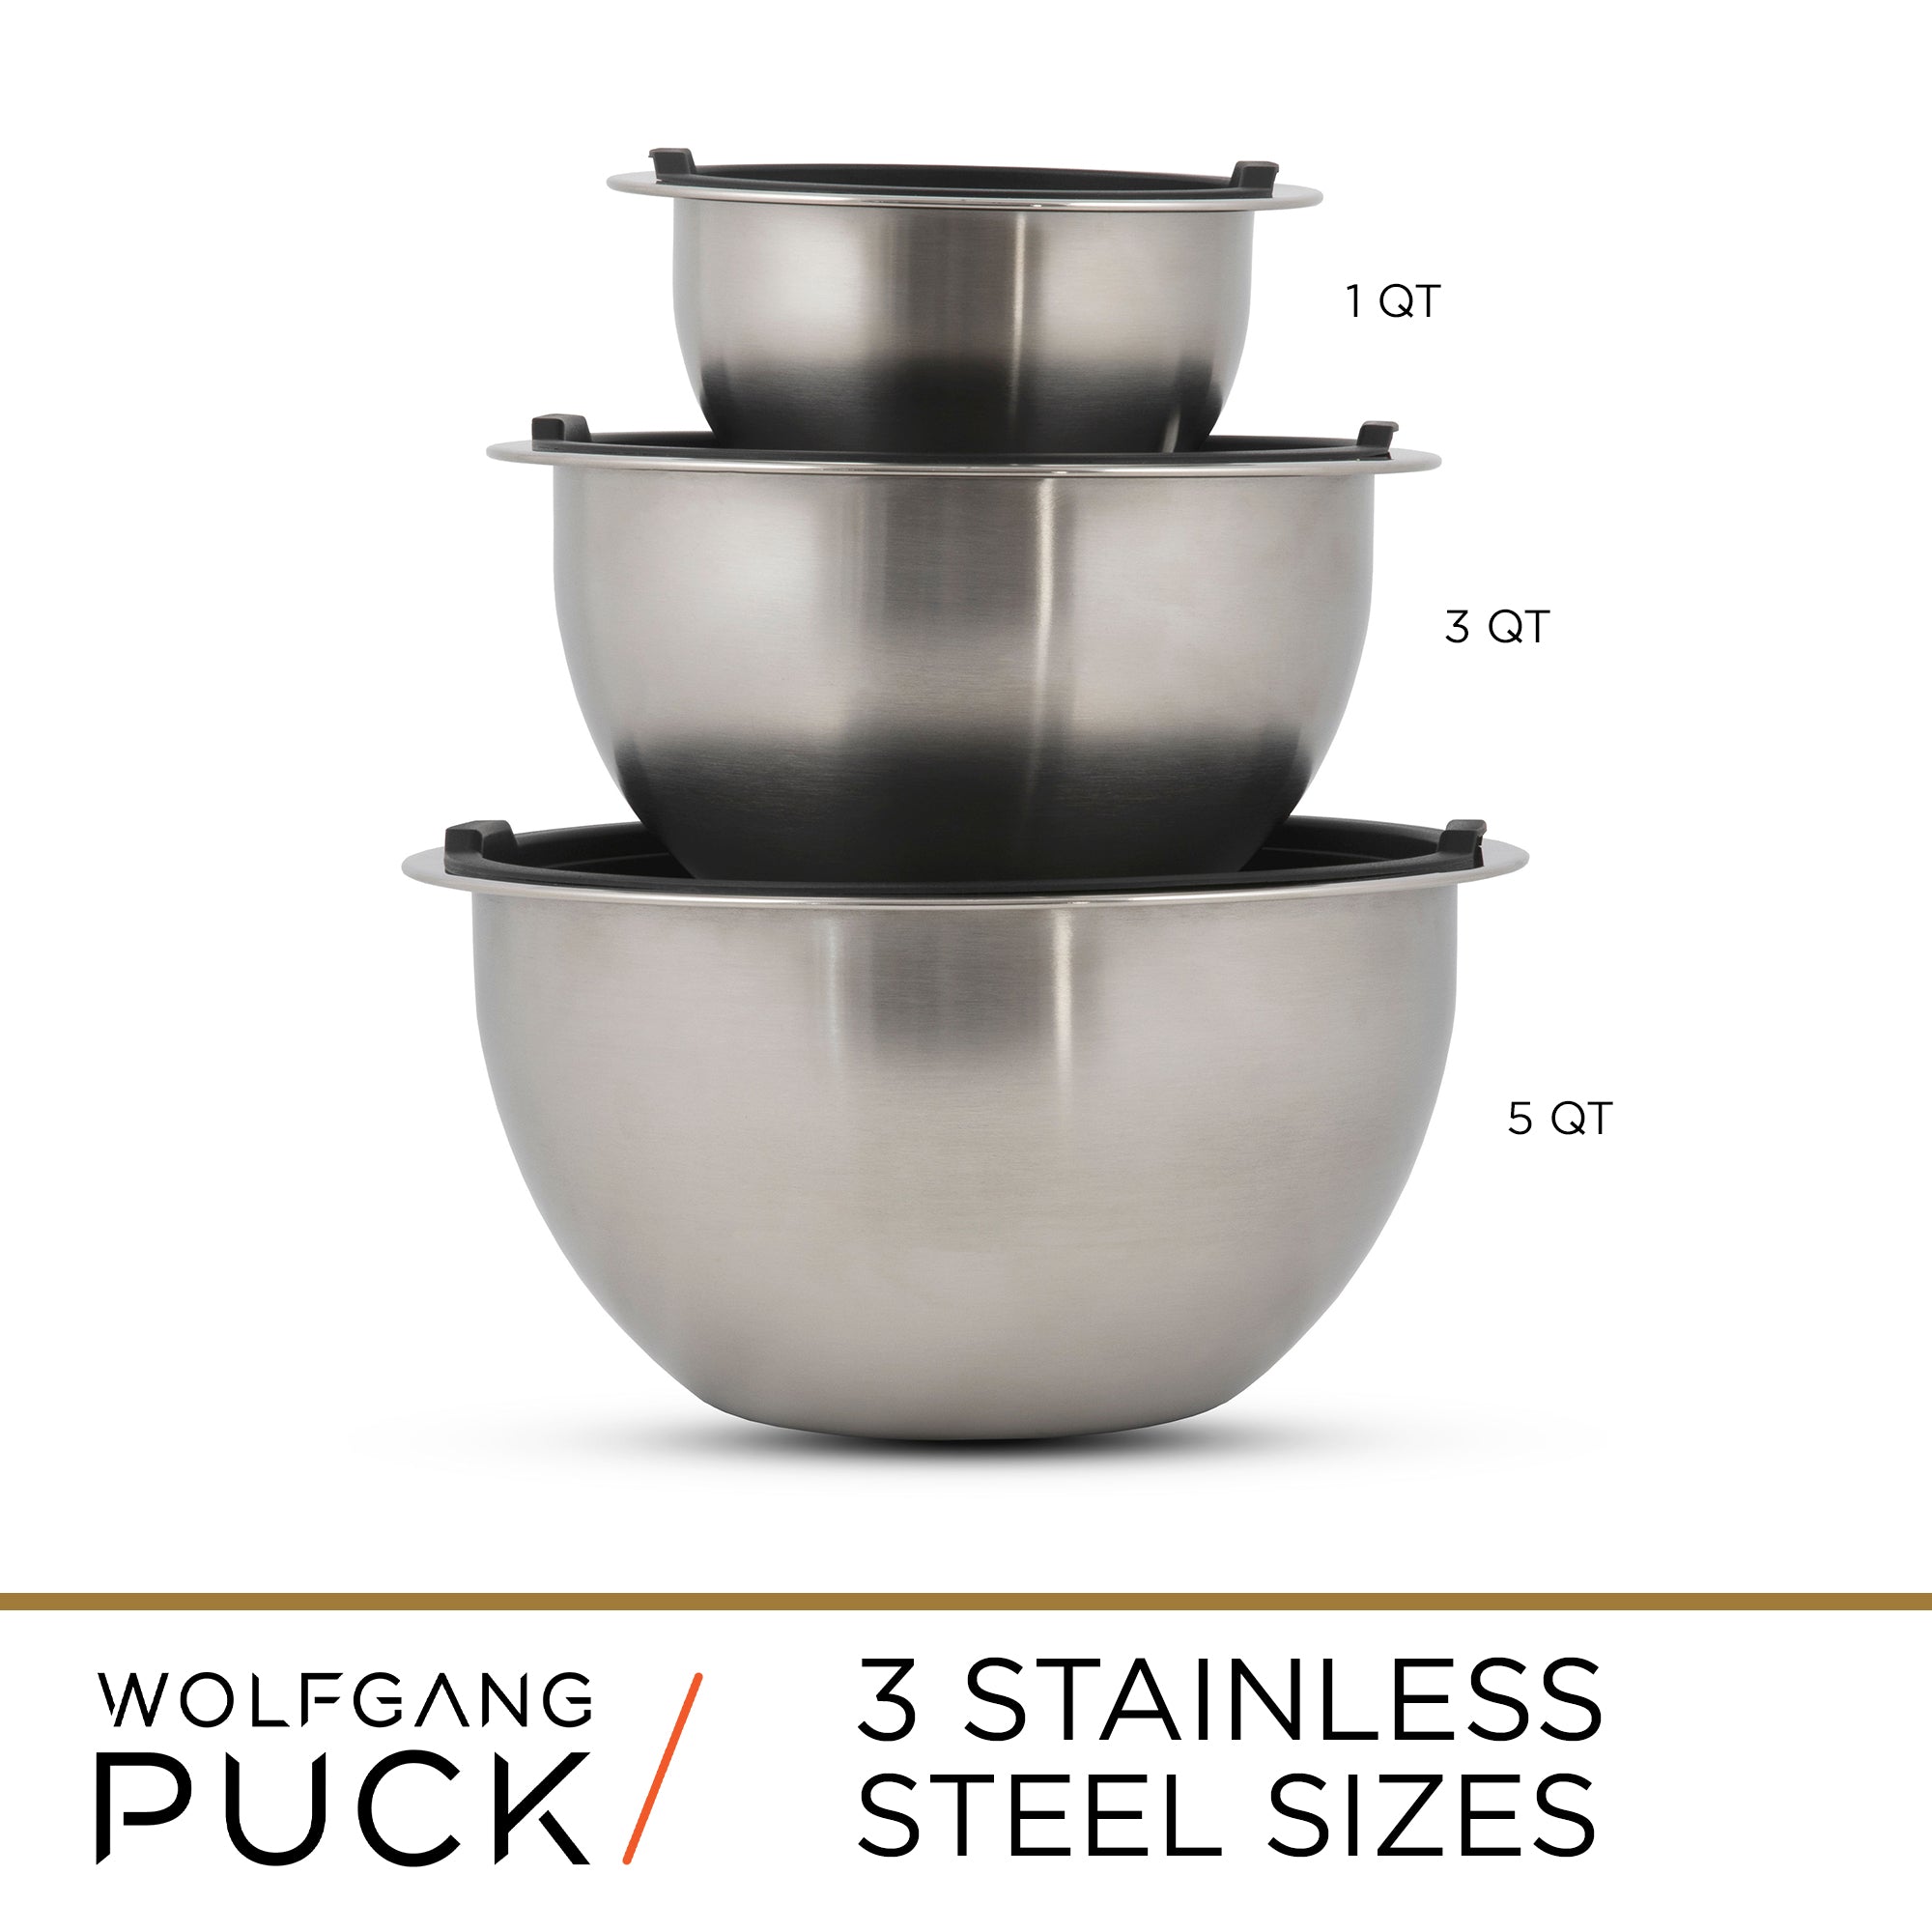 Wolfgang Puck 18-Piece Stainless Steel Cookware Set - Sam's Club